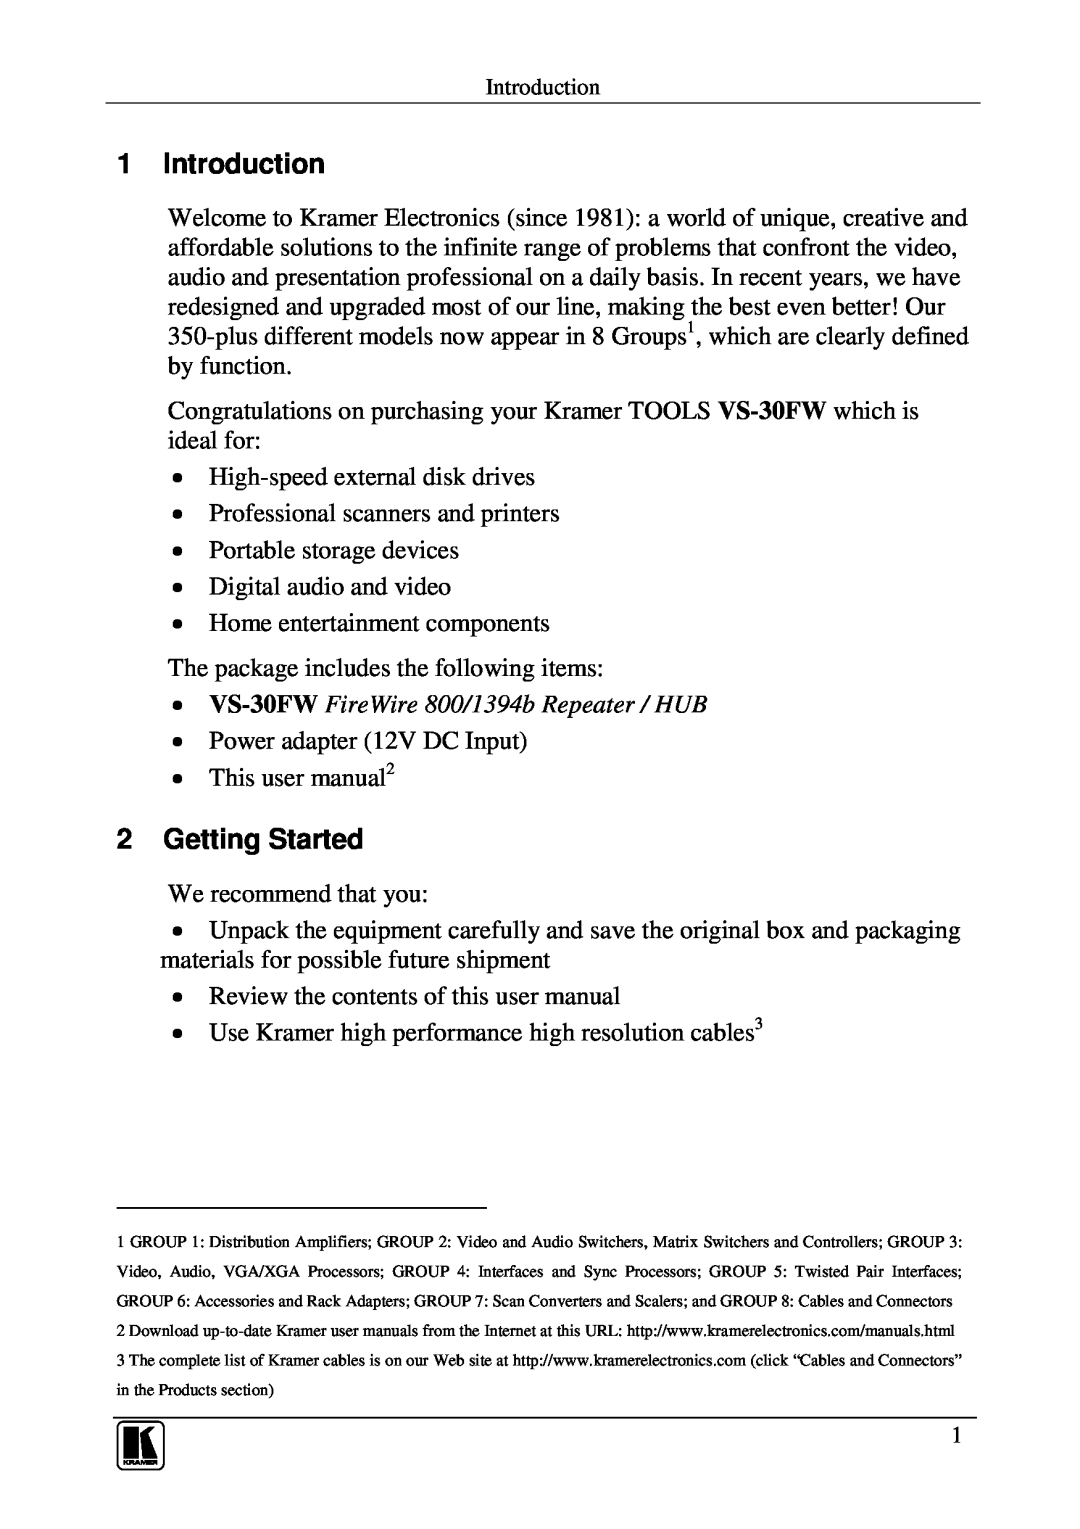 Kramer Electronics user manual Introduction, Getting Started, VS-30FW FireWire 800/1394b Repeater / HUB 